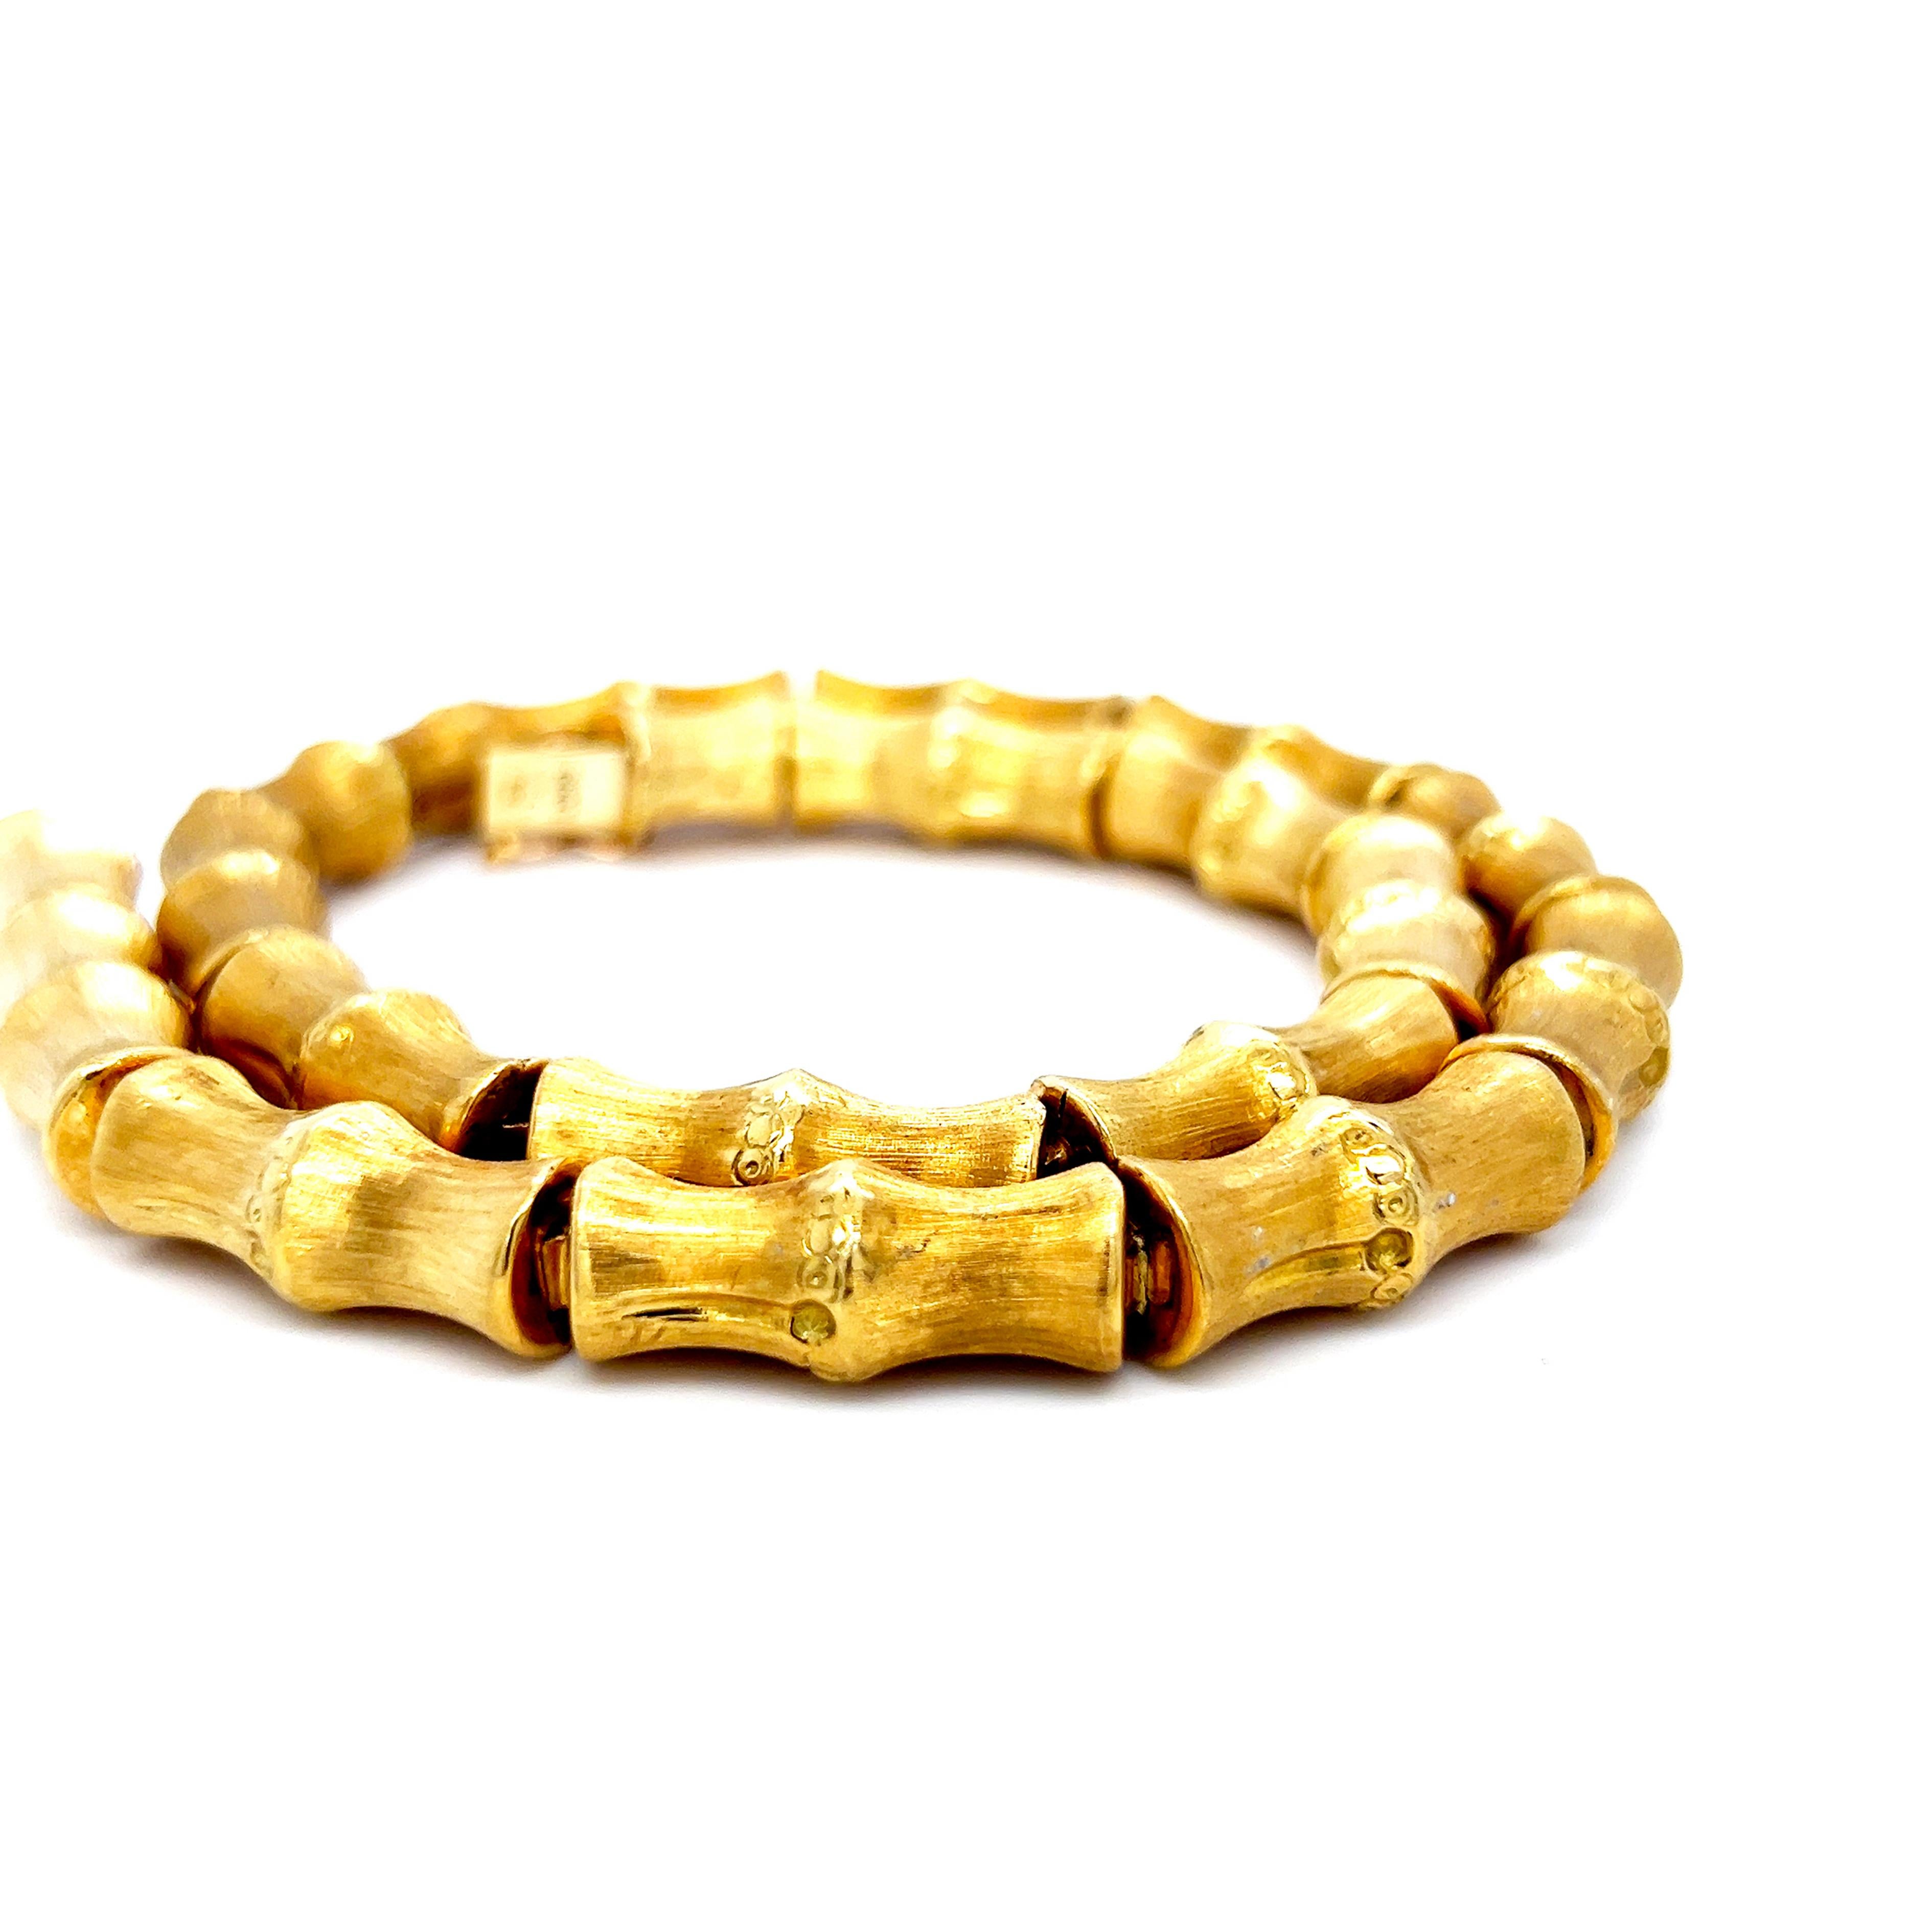 One-of-a-kind, circa 1980, Hancrafted Yellow Gold brushed Necklace, in Gucci Iconic Bamboo Style. This unique, chic and simple custom made piece is crafted to look and feel like precious silky wood  fitting perfectly on your neck or with effortless